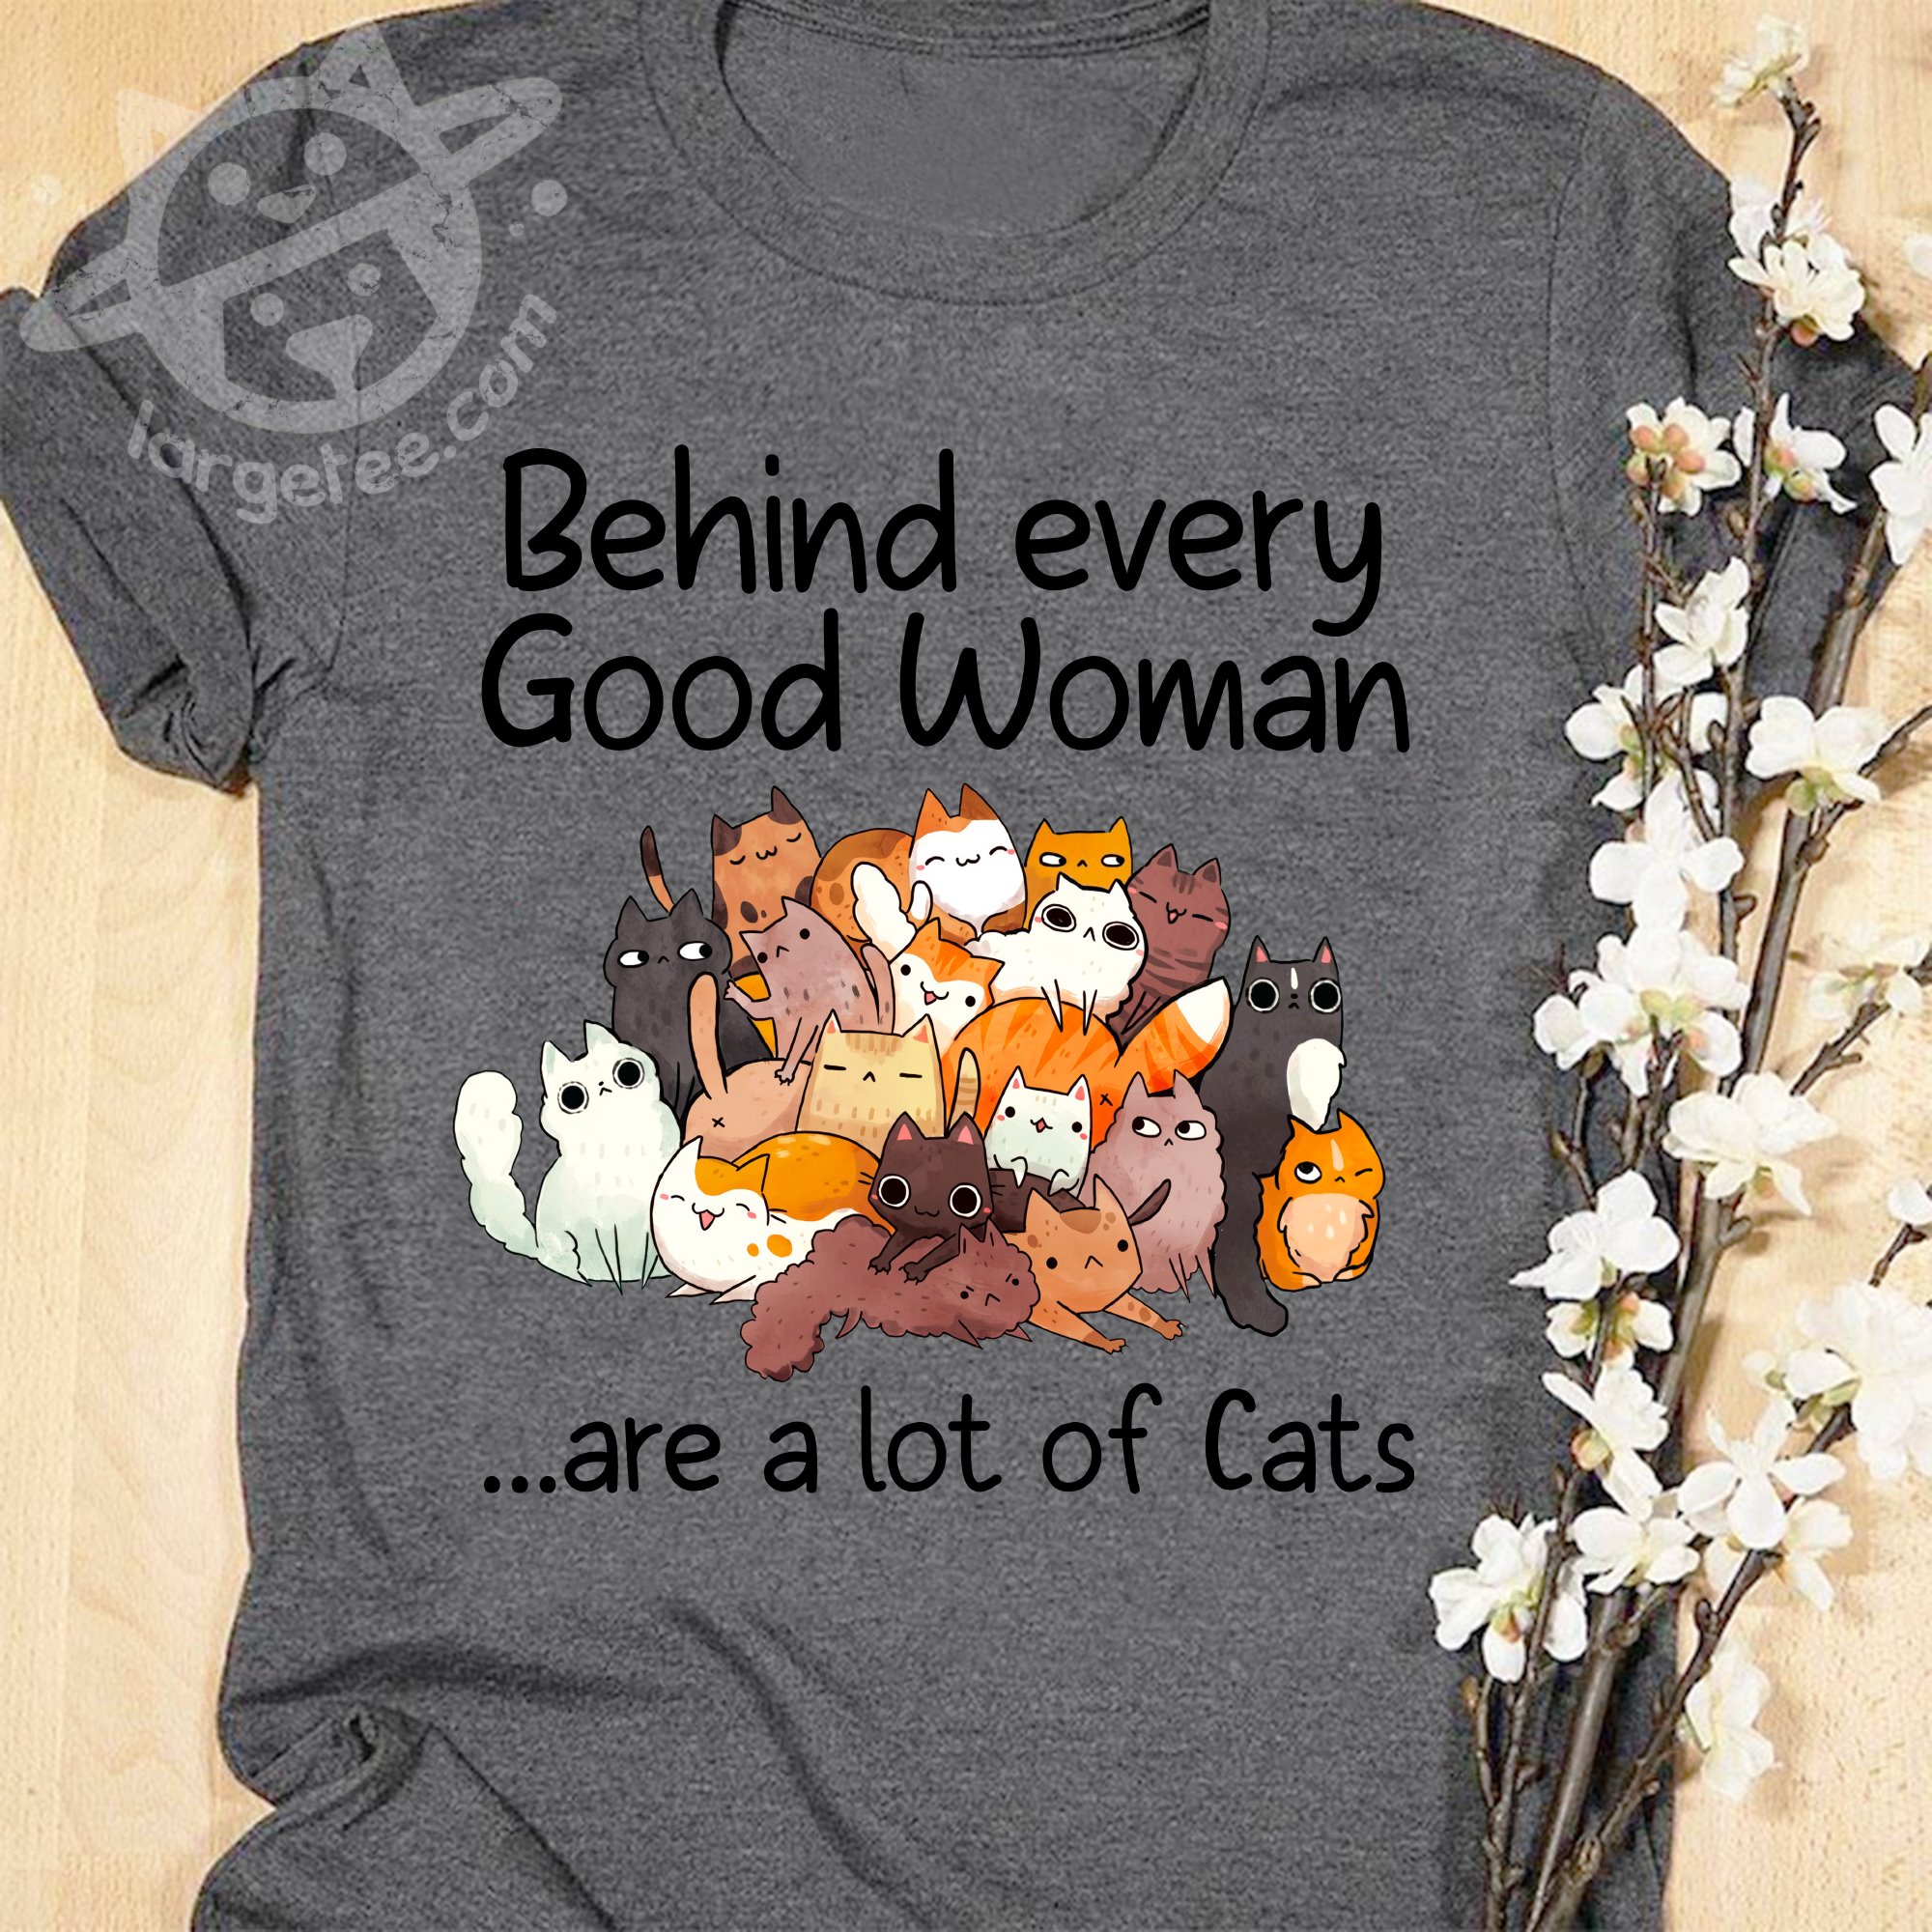 Behind every good woman are a lot of Cats